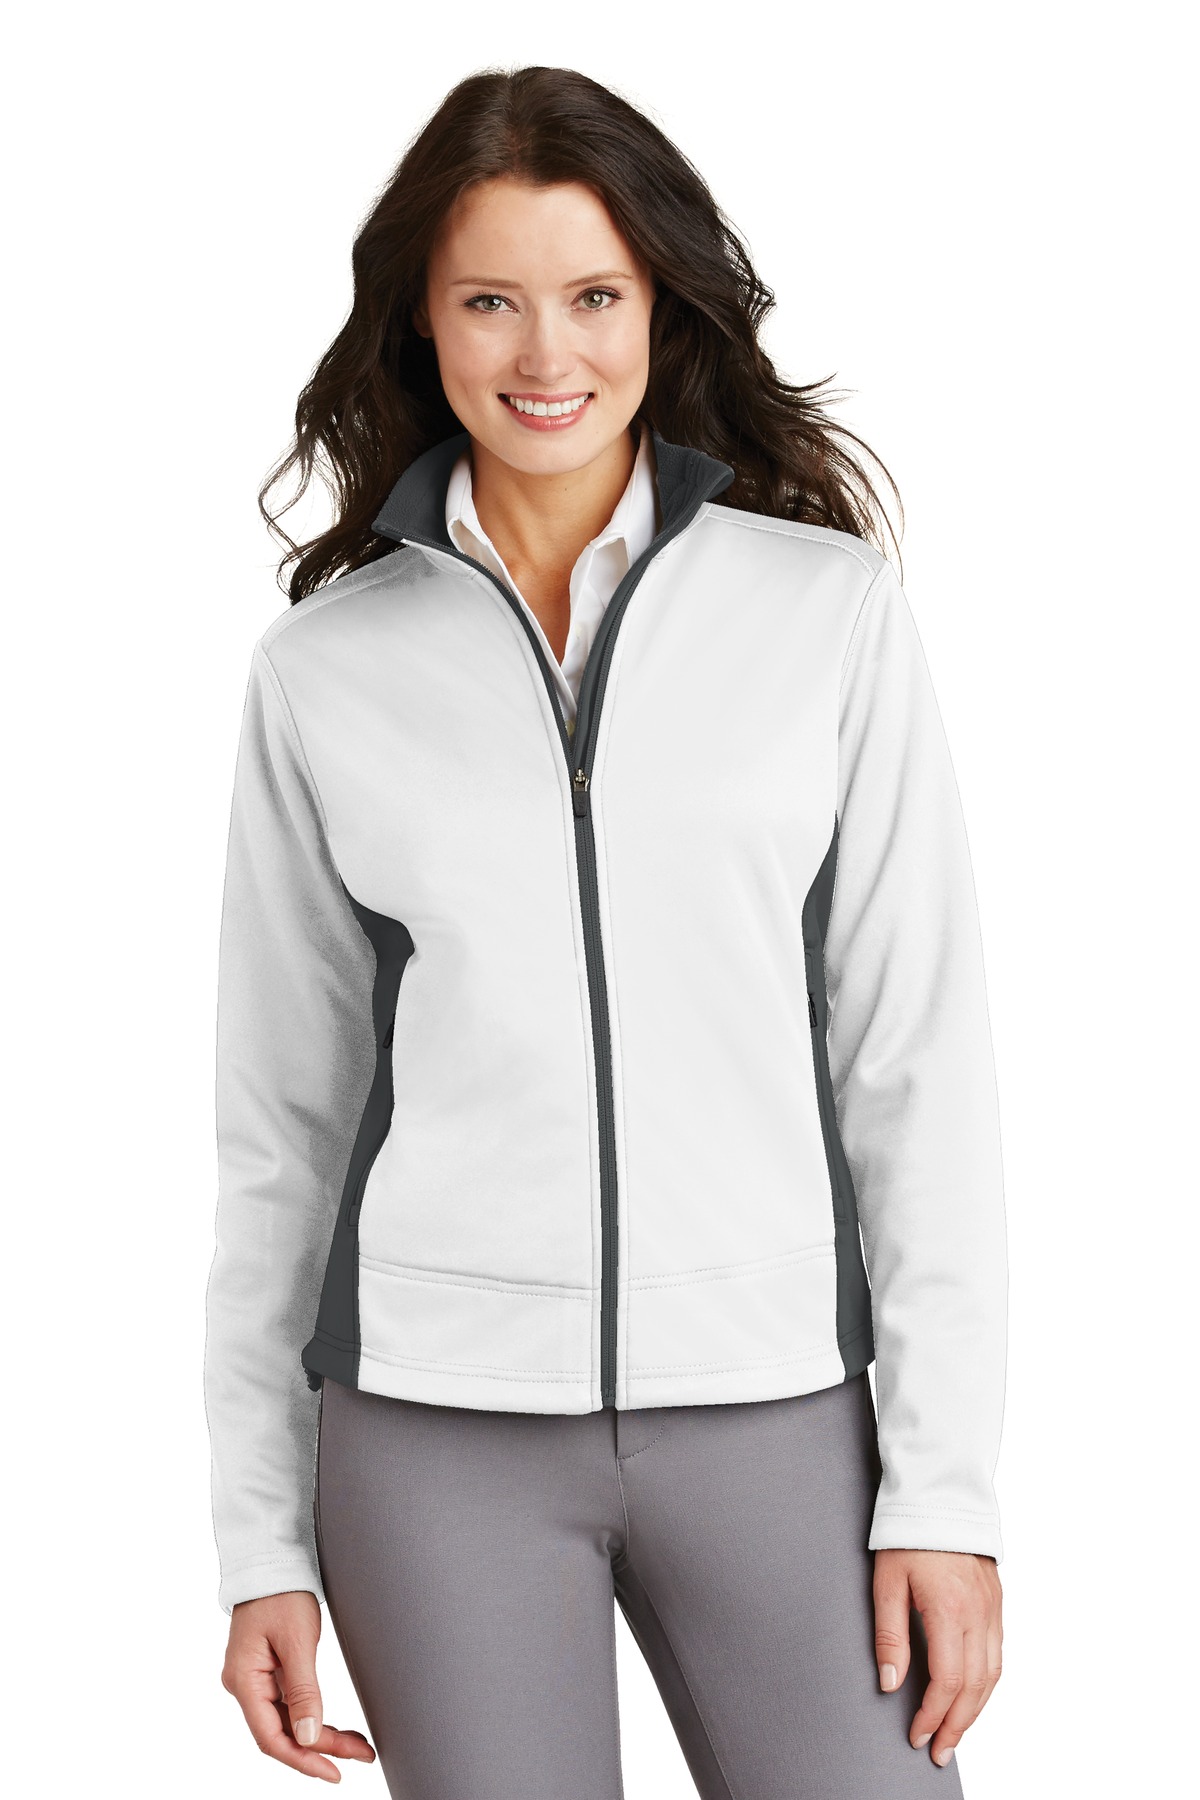 DISCONTINUED Port Authority Ladies Two-Tone Soft Shell Jacket.  L794